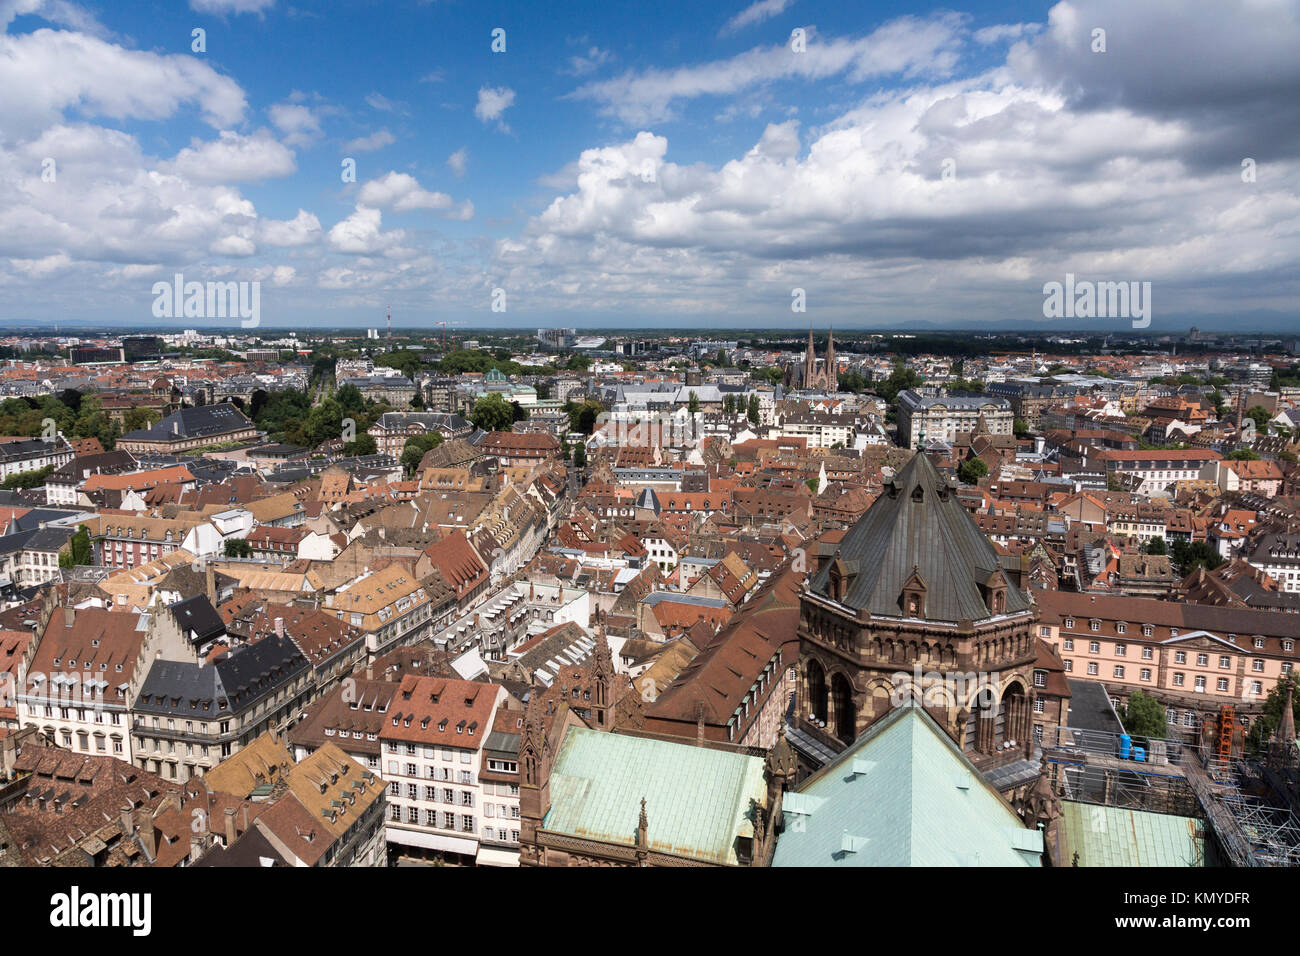 A view across Strasbourg city centre towards the European Parliament building, as seen from Strasbourg cathedral Stock Photo